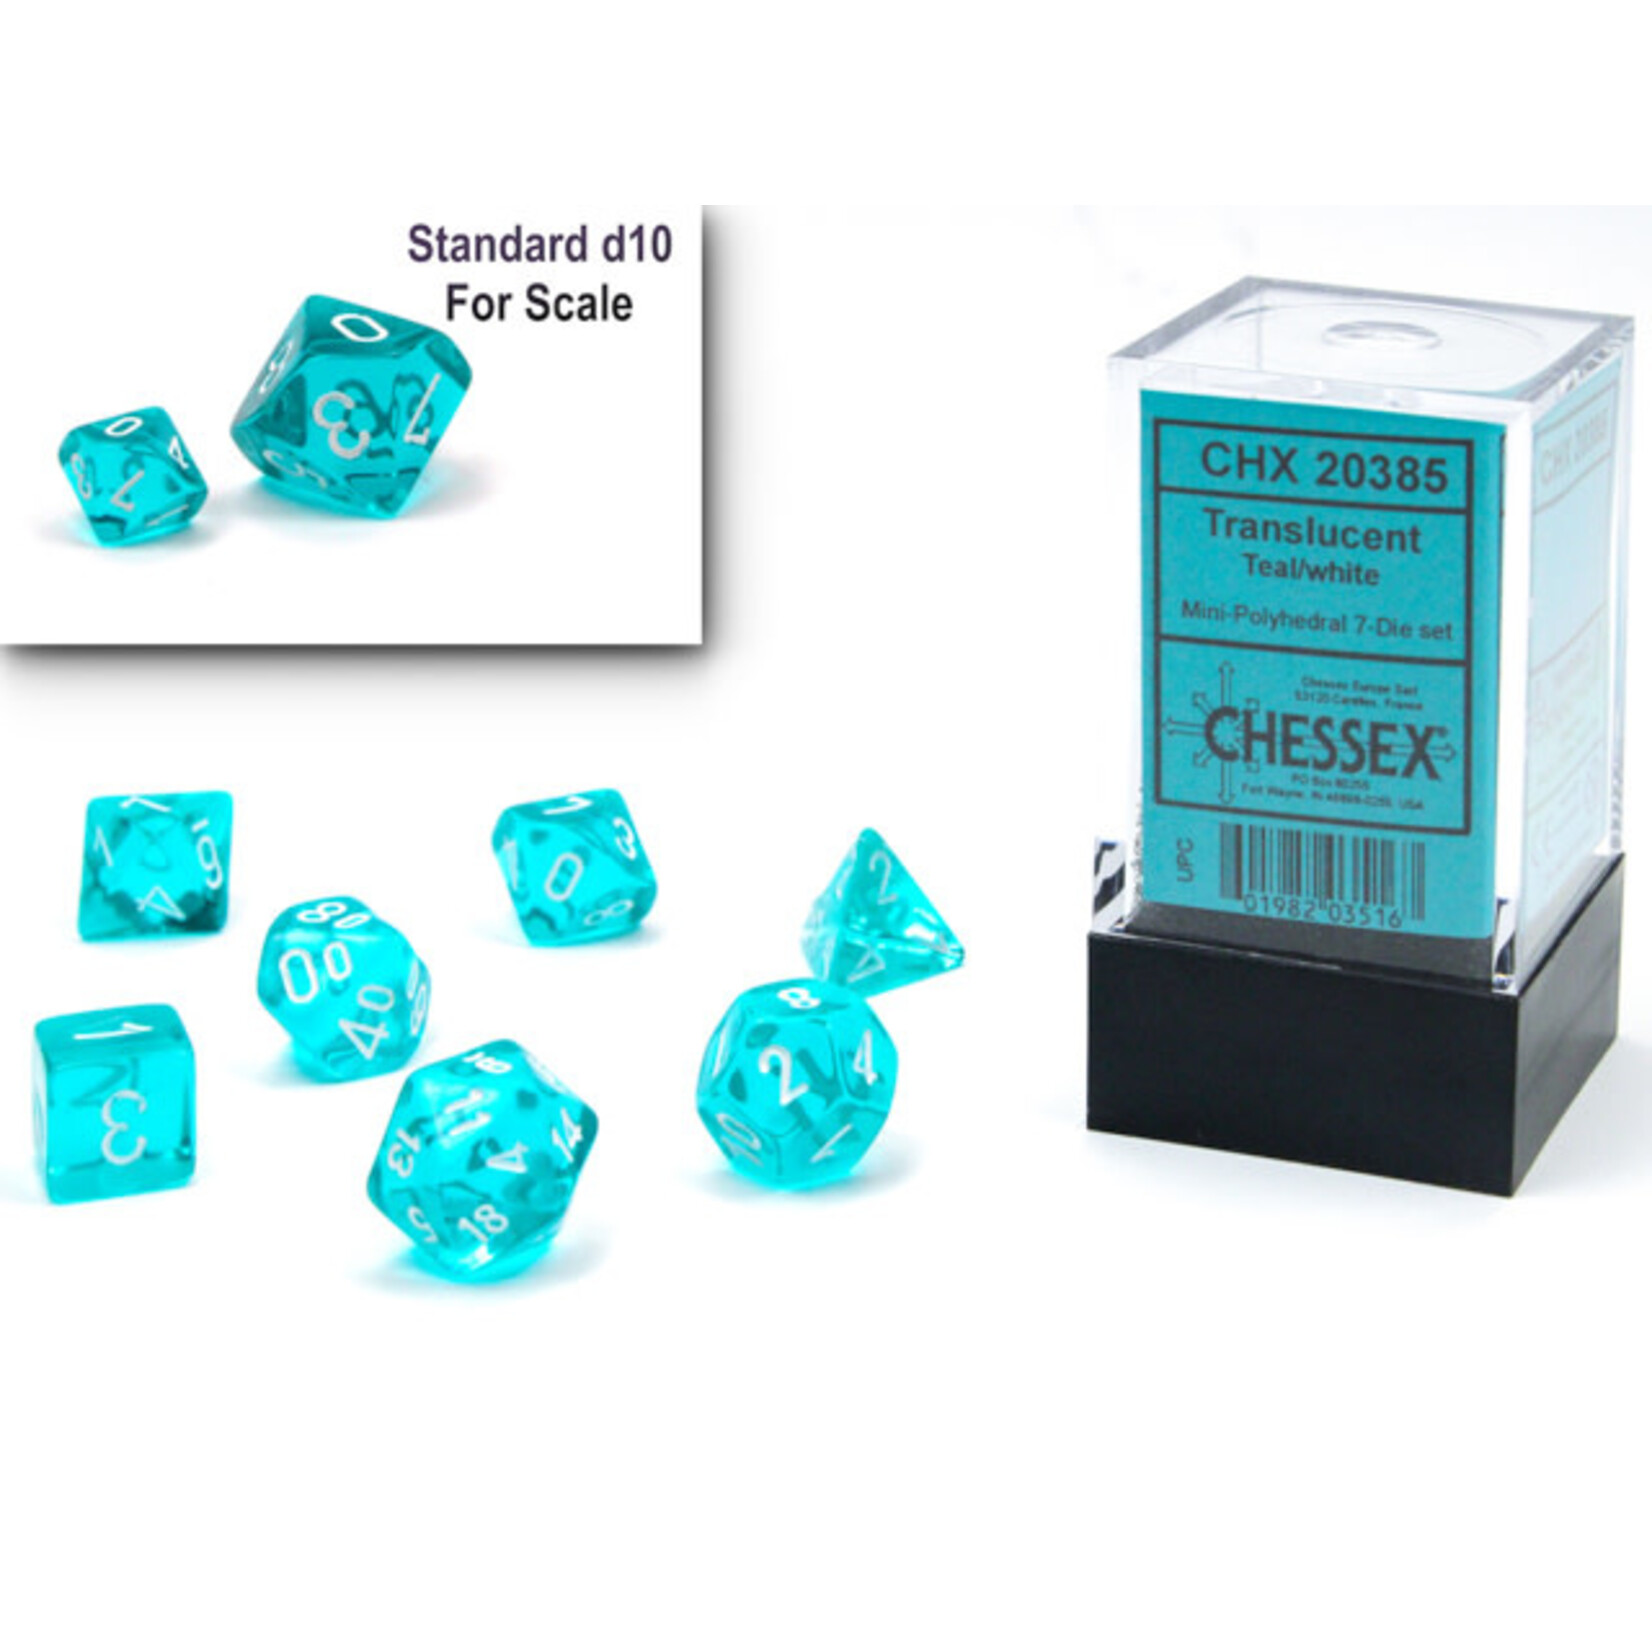 Chessex Translucent Mini-hedral™ Teal/white 7-Die Set